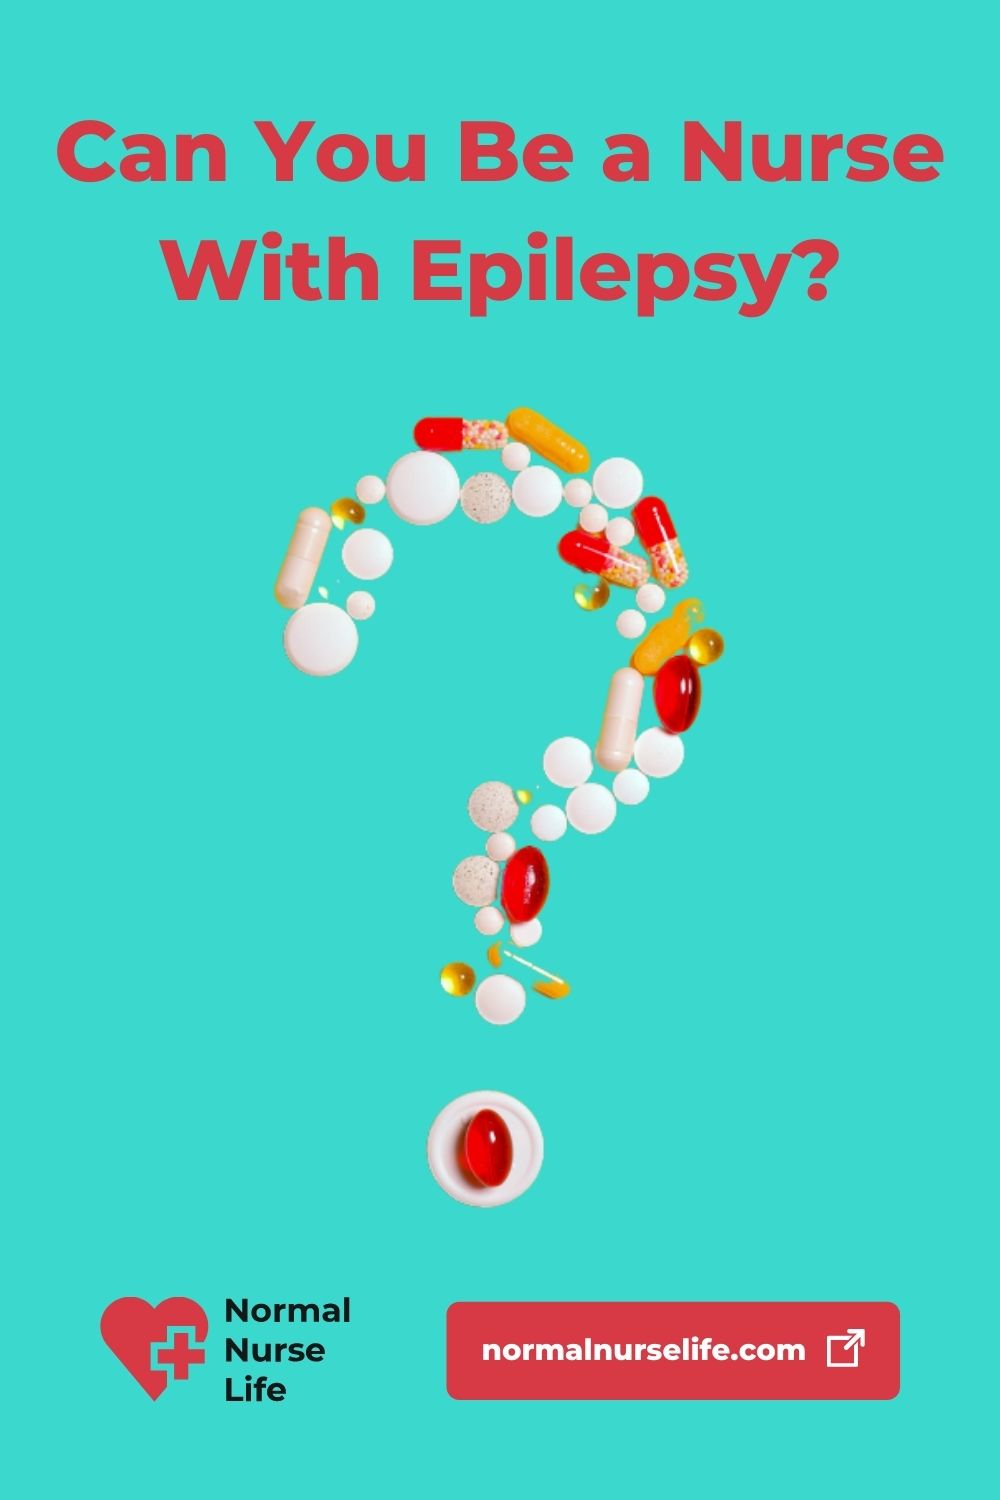 Can you be a nurse if you have epilepsy